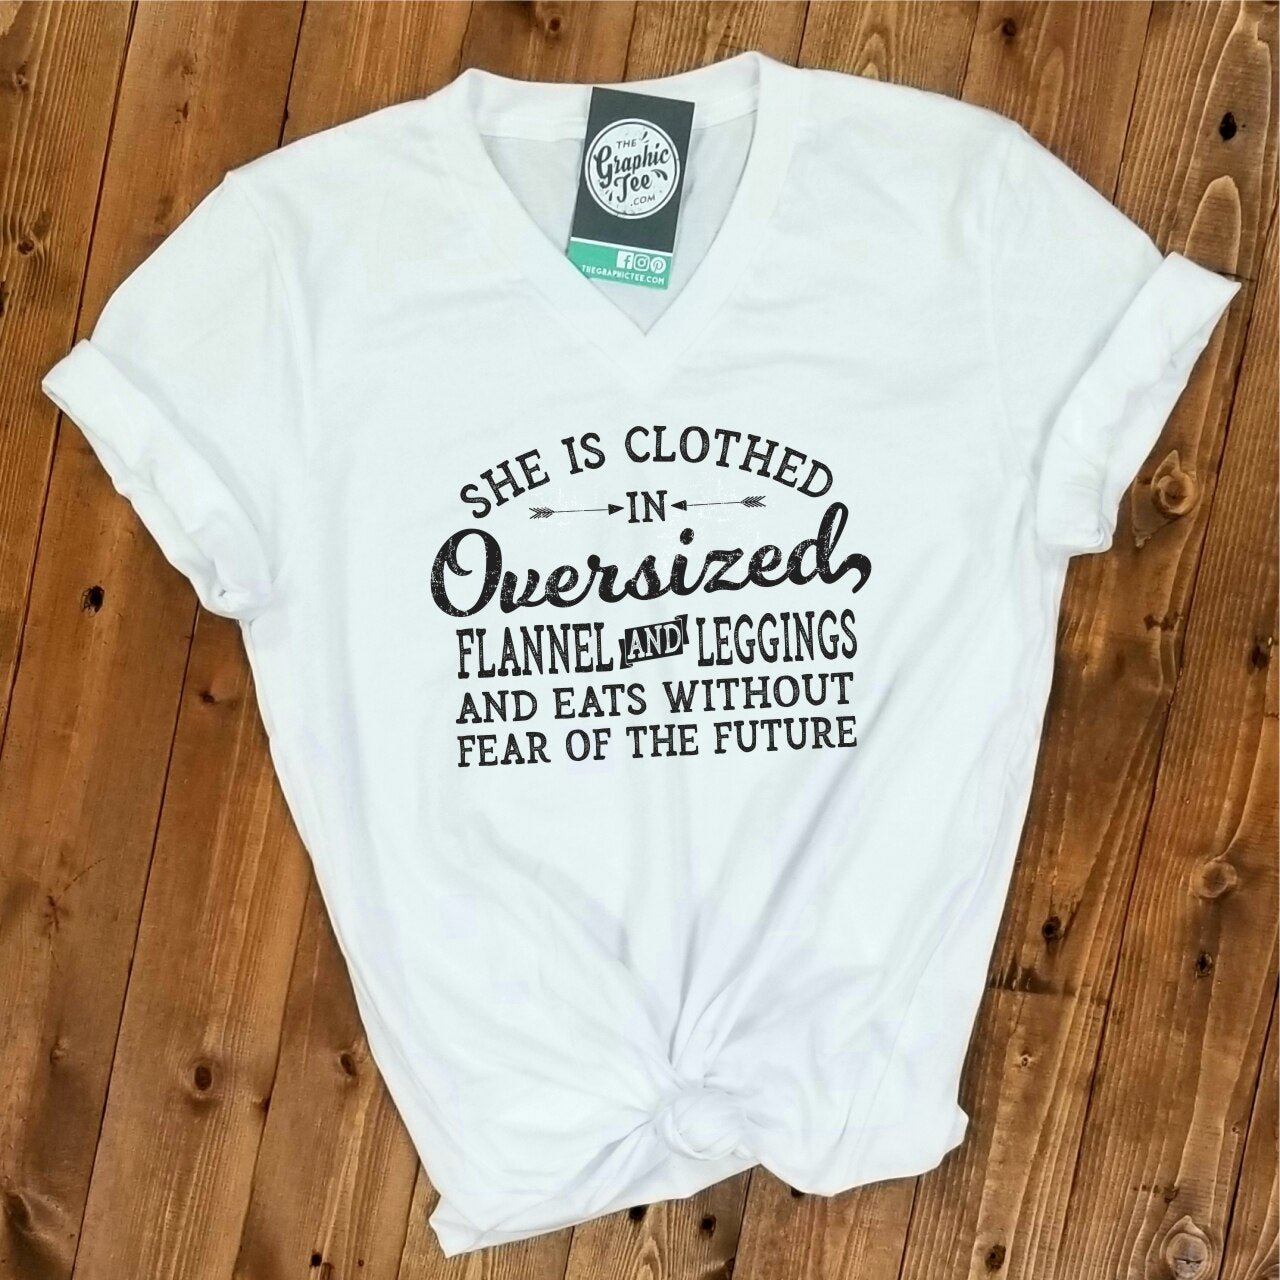 She is Clothed in Oversized Flannel and Leggings... - V-Neck Tee - The Graphic Tee